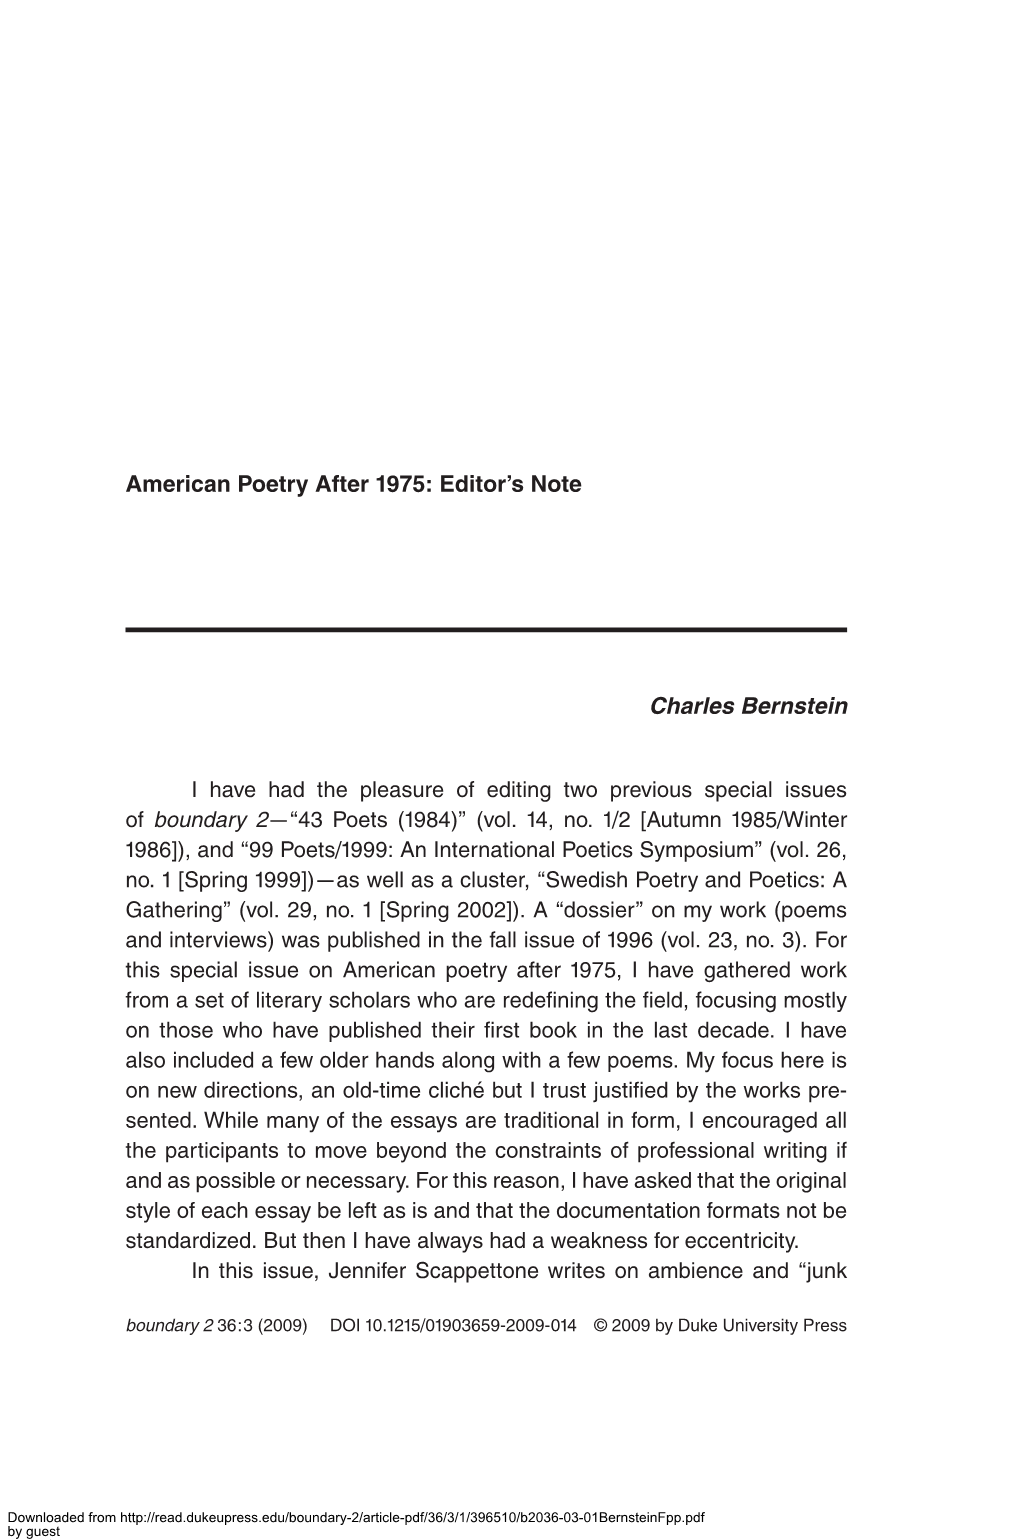 American Poetry After 1975: Editor's Note Charles Bernstein